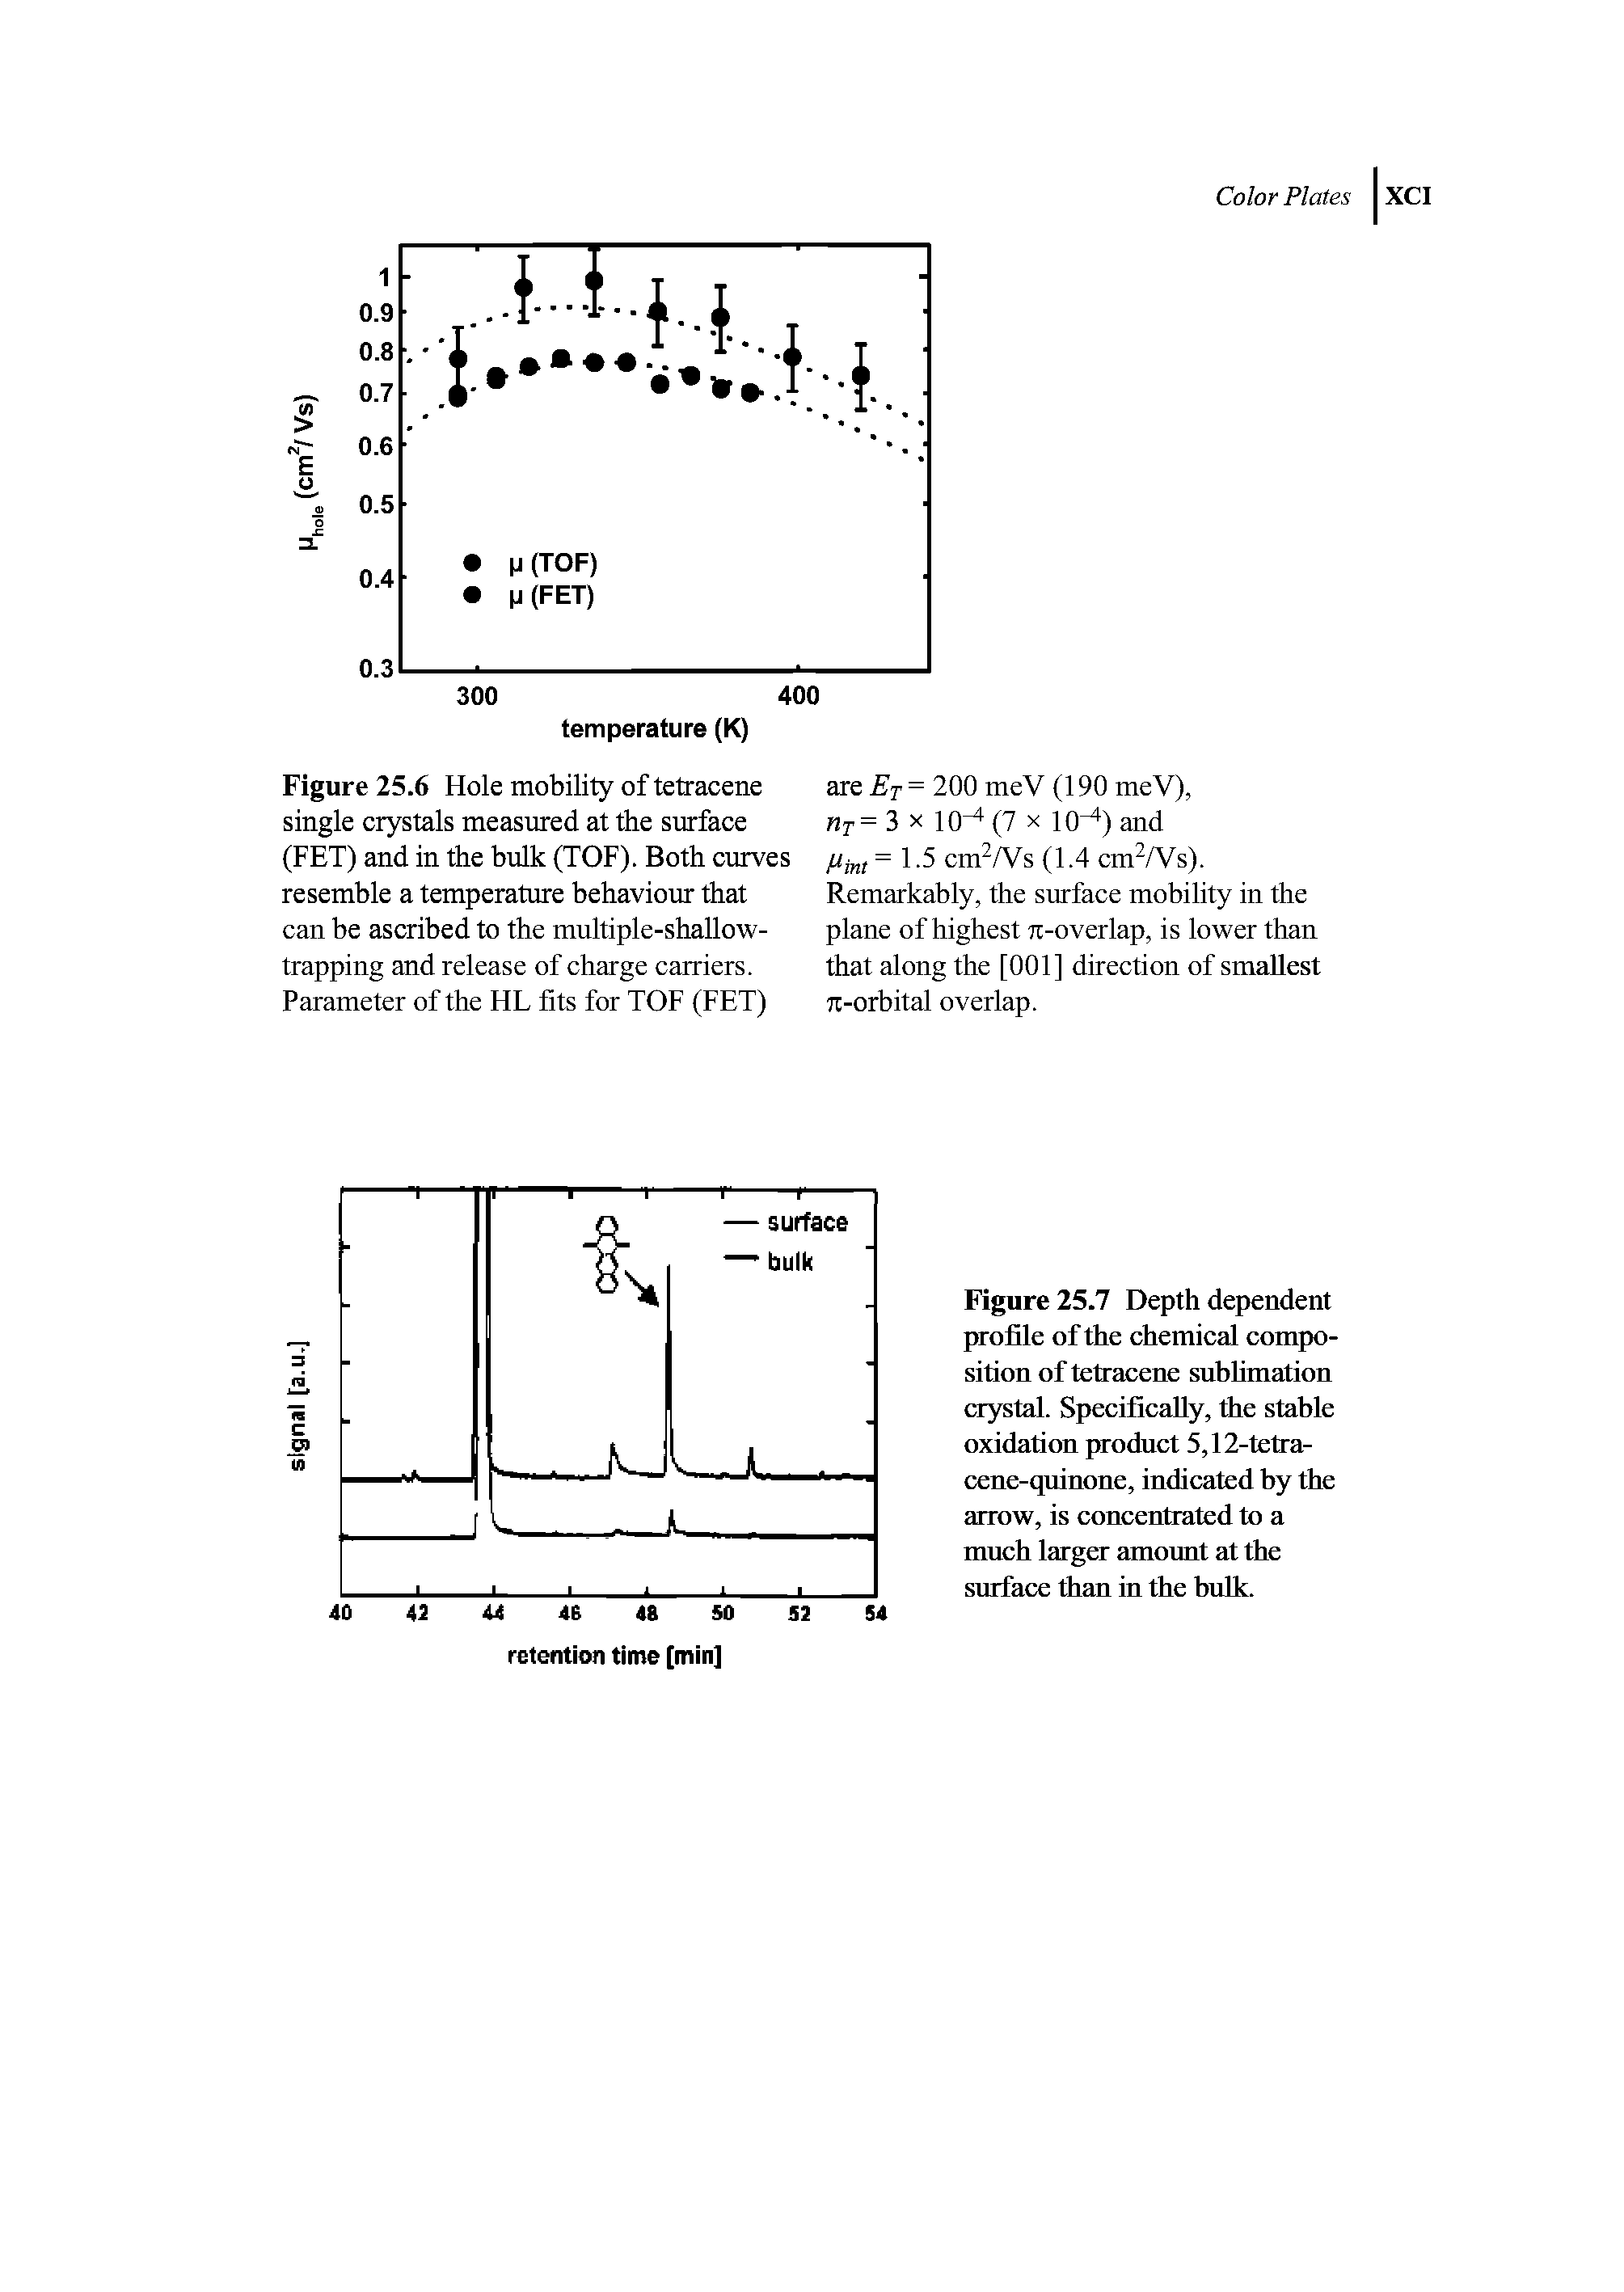 Figure 25.7 Depth dependent profile of the chemical composition of tetracene sublimation crystal. Specifically, the stable oxidation product 5,12-tetra-cene-quinone, indicated by the arrow, is concentrated to a much larger amount at the surface than in the bulk.